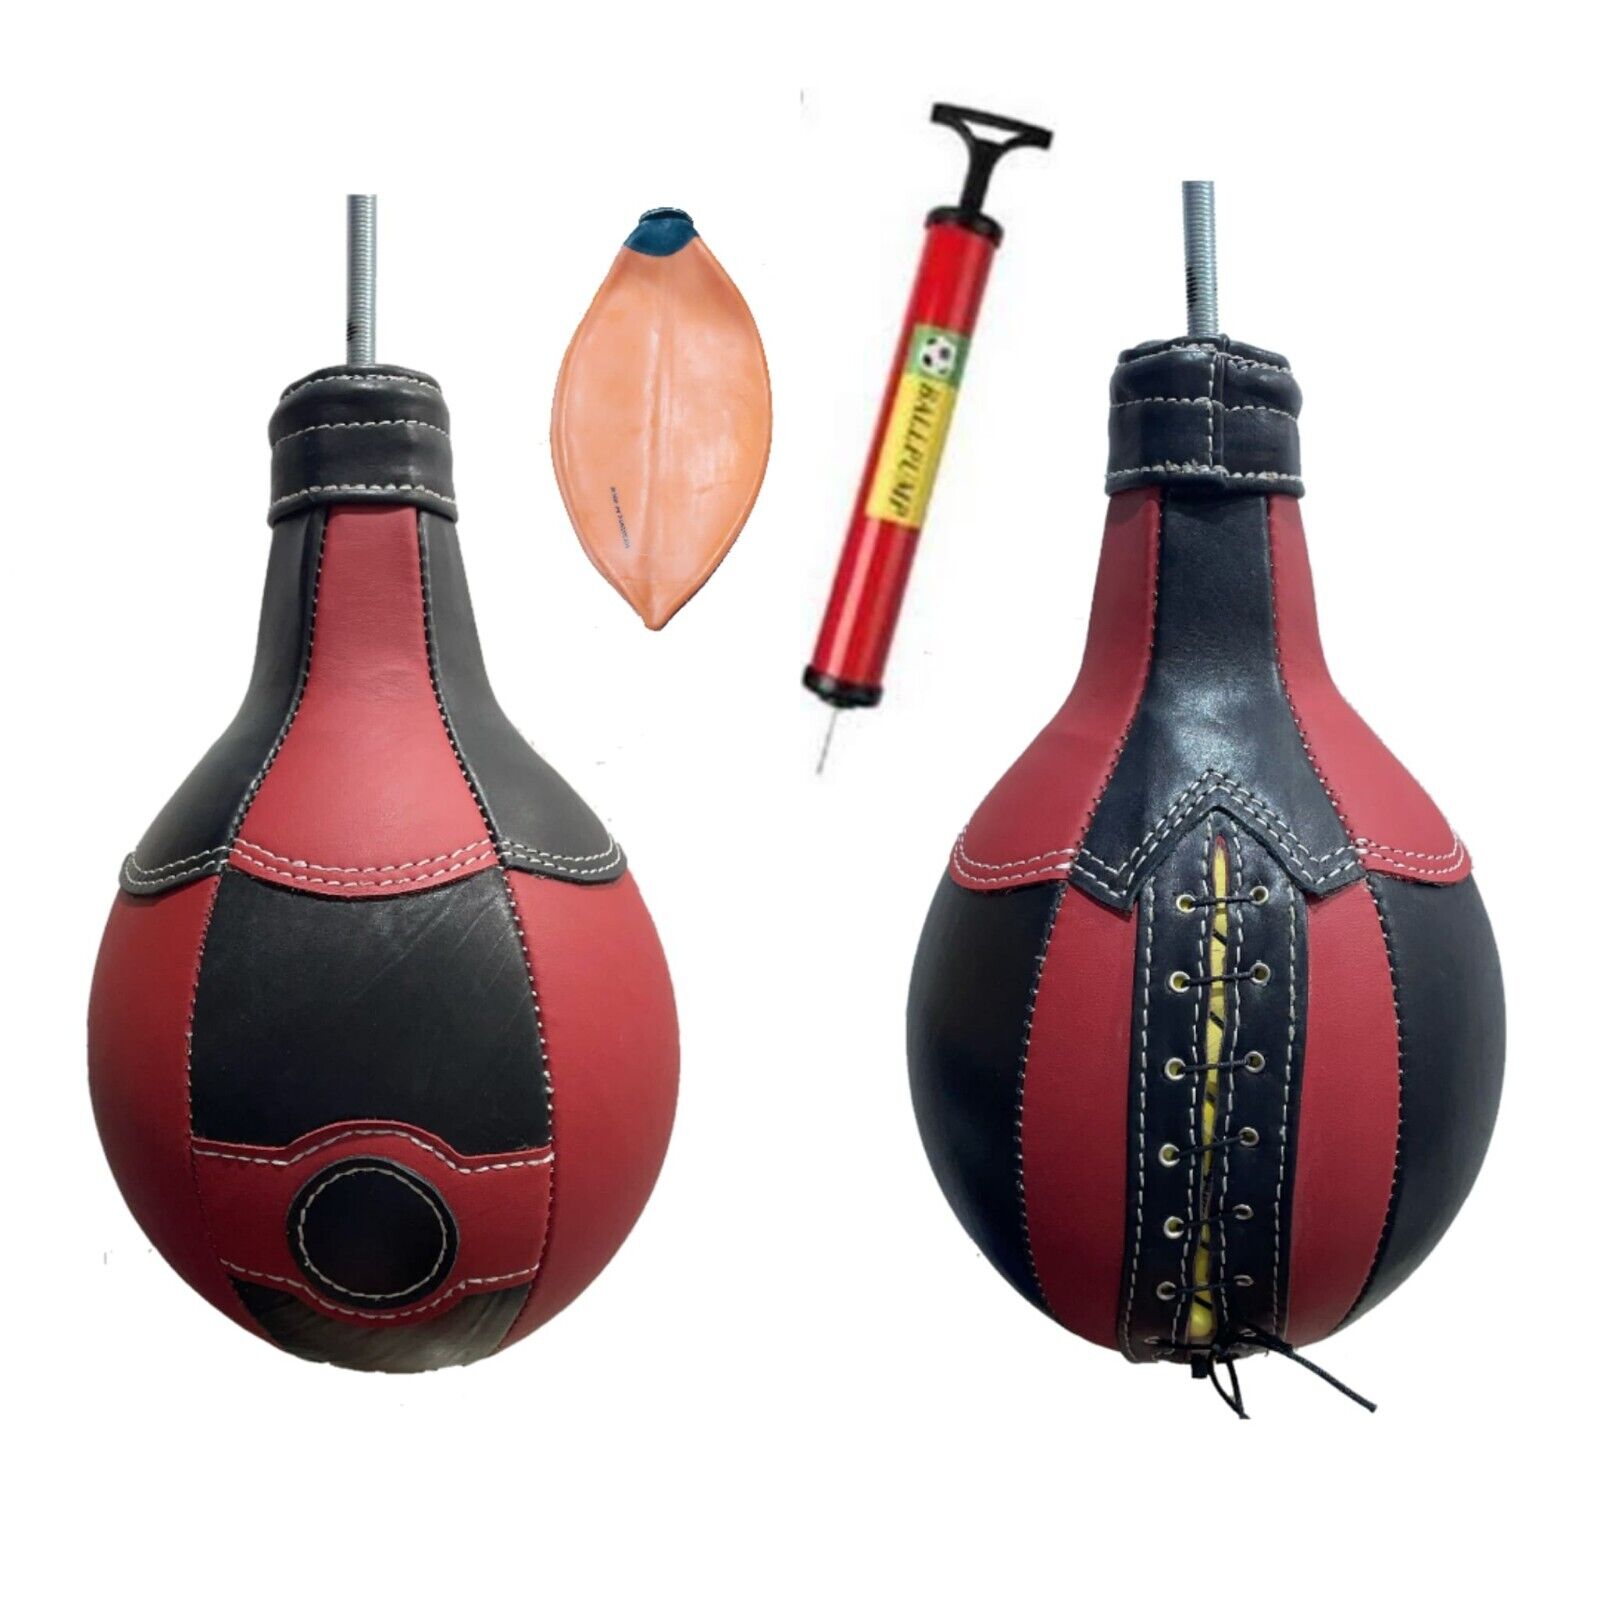 Punchball for boxer machine Punching ball for arcade game. FREE EXTRA BLADDER...